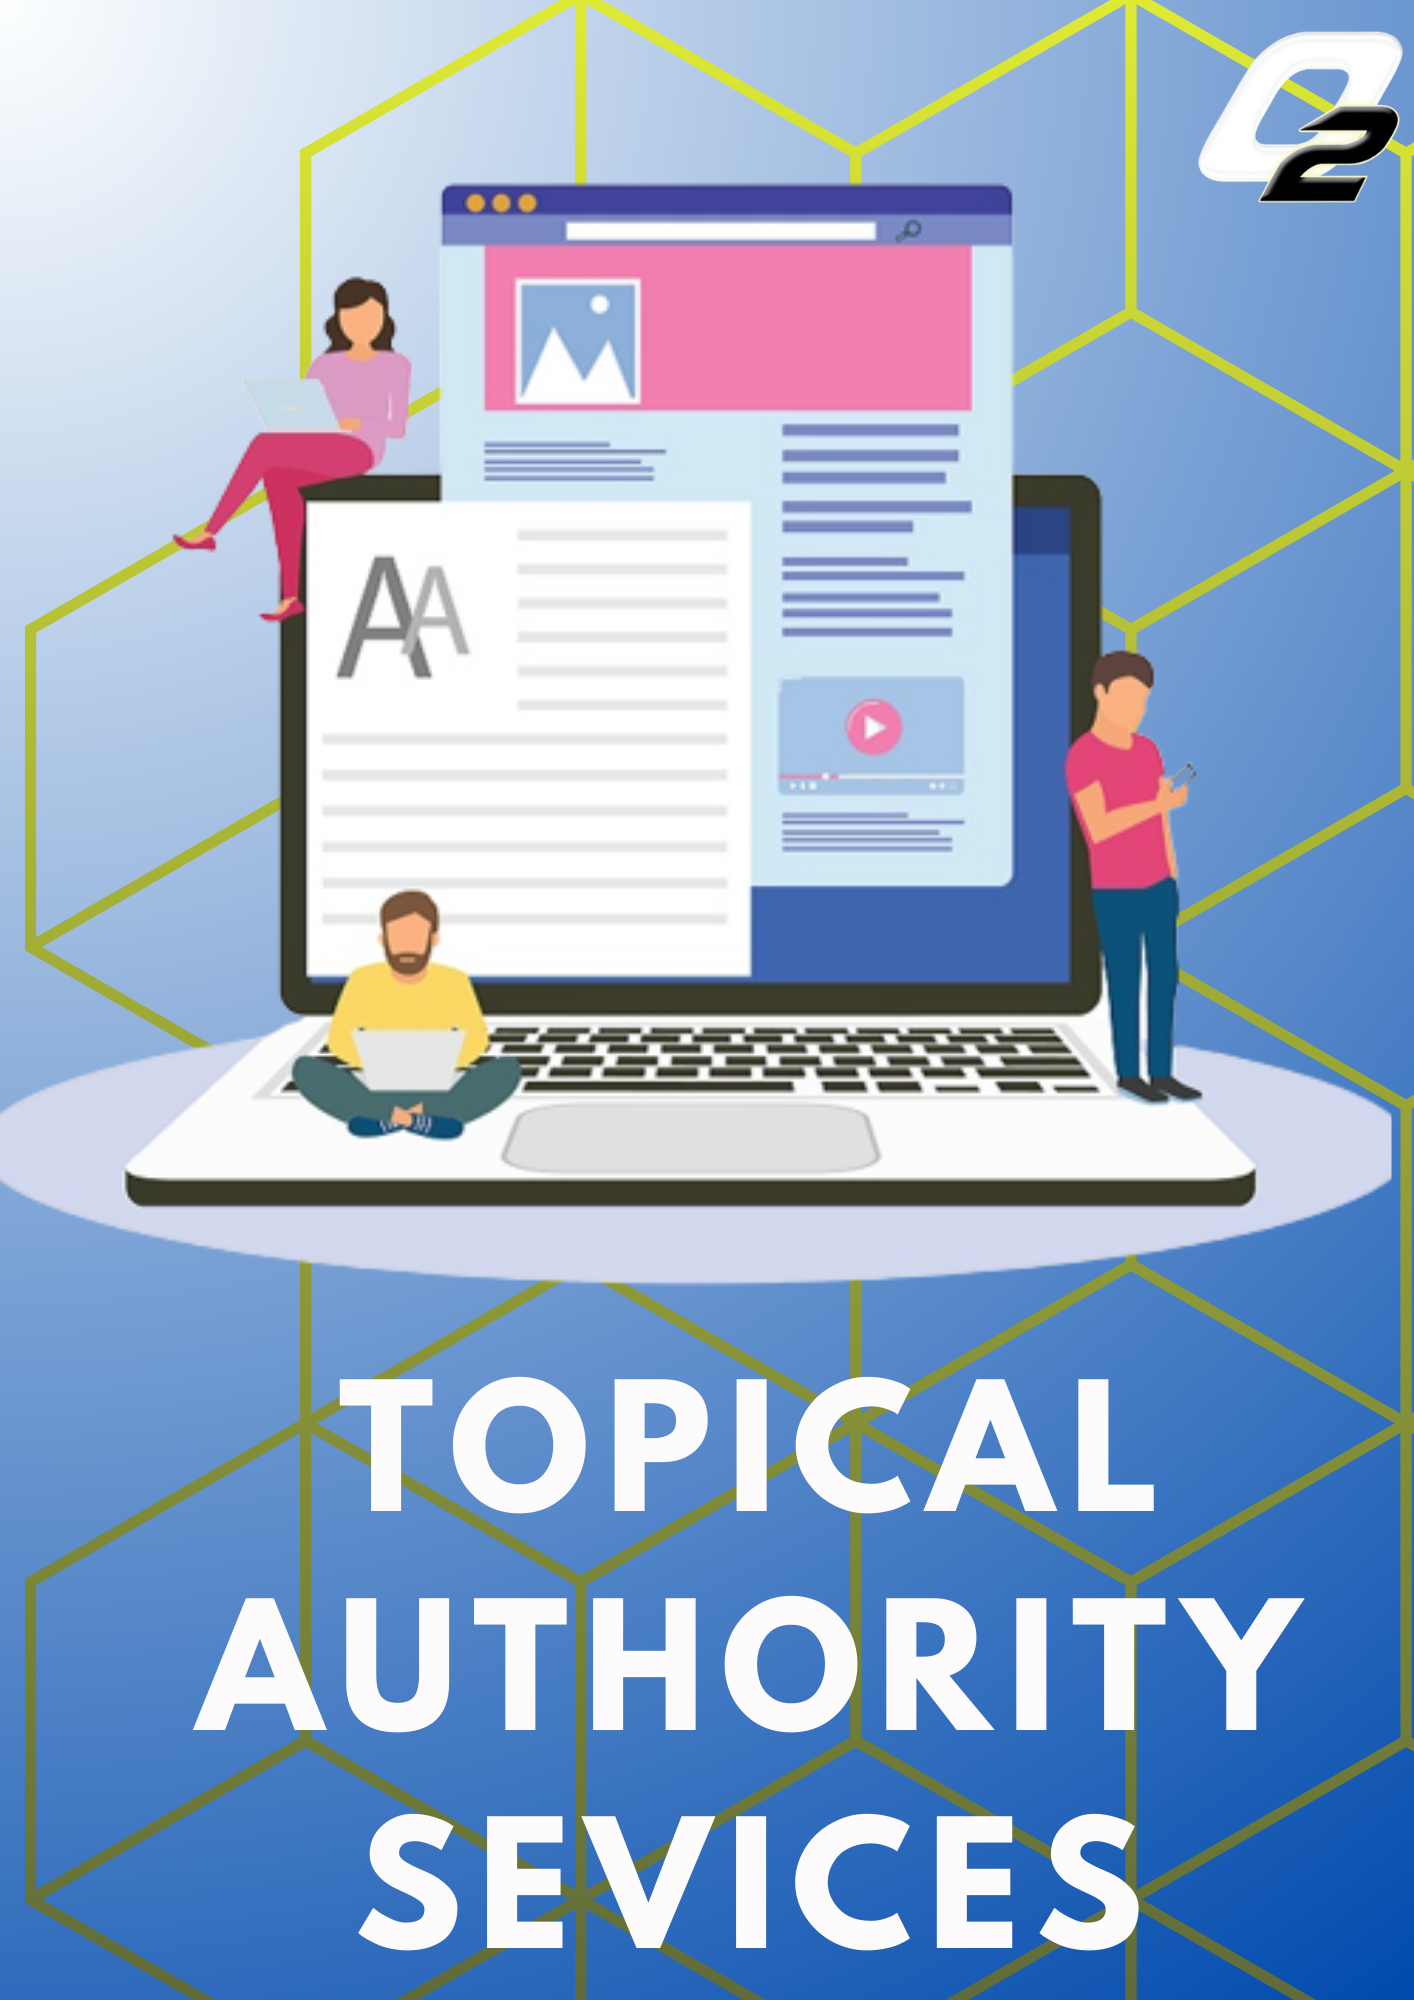 Topical authority services